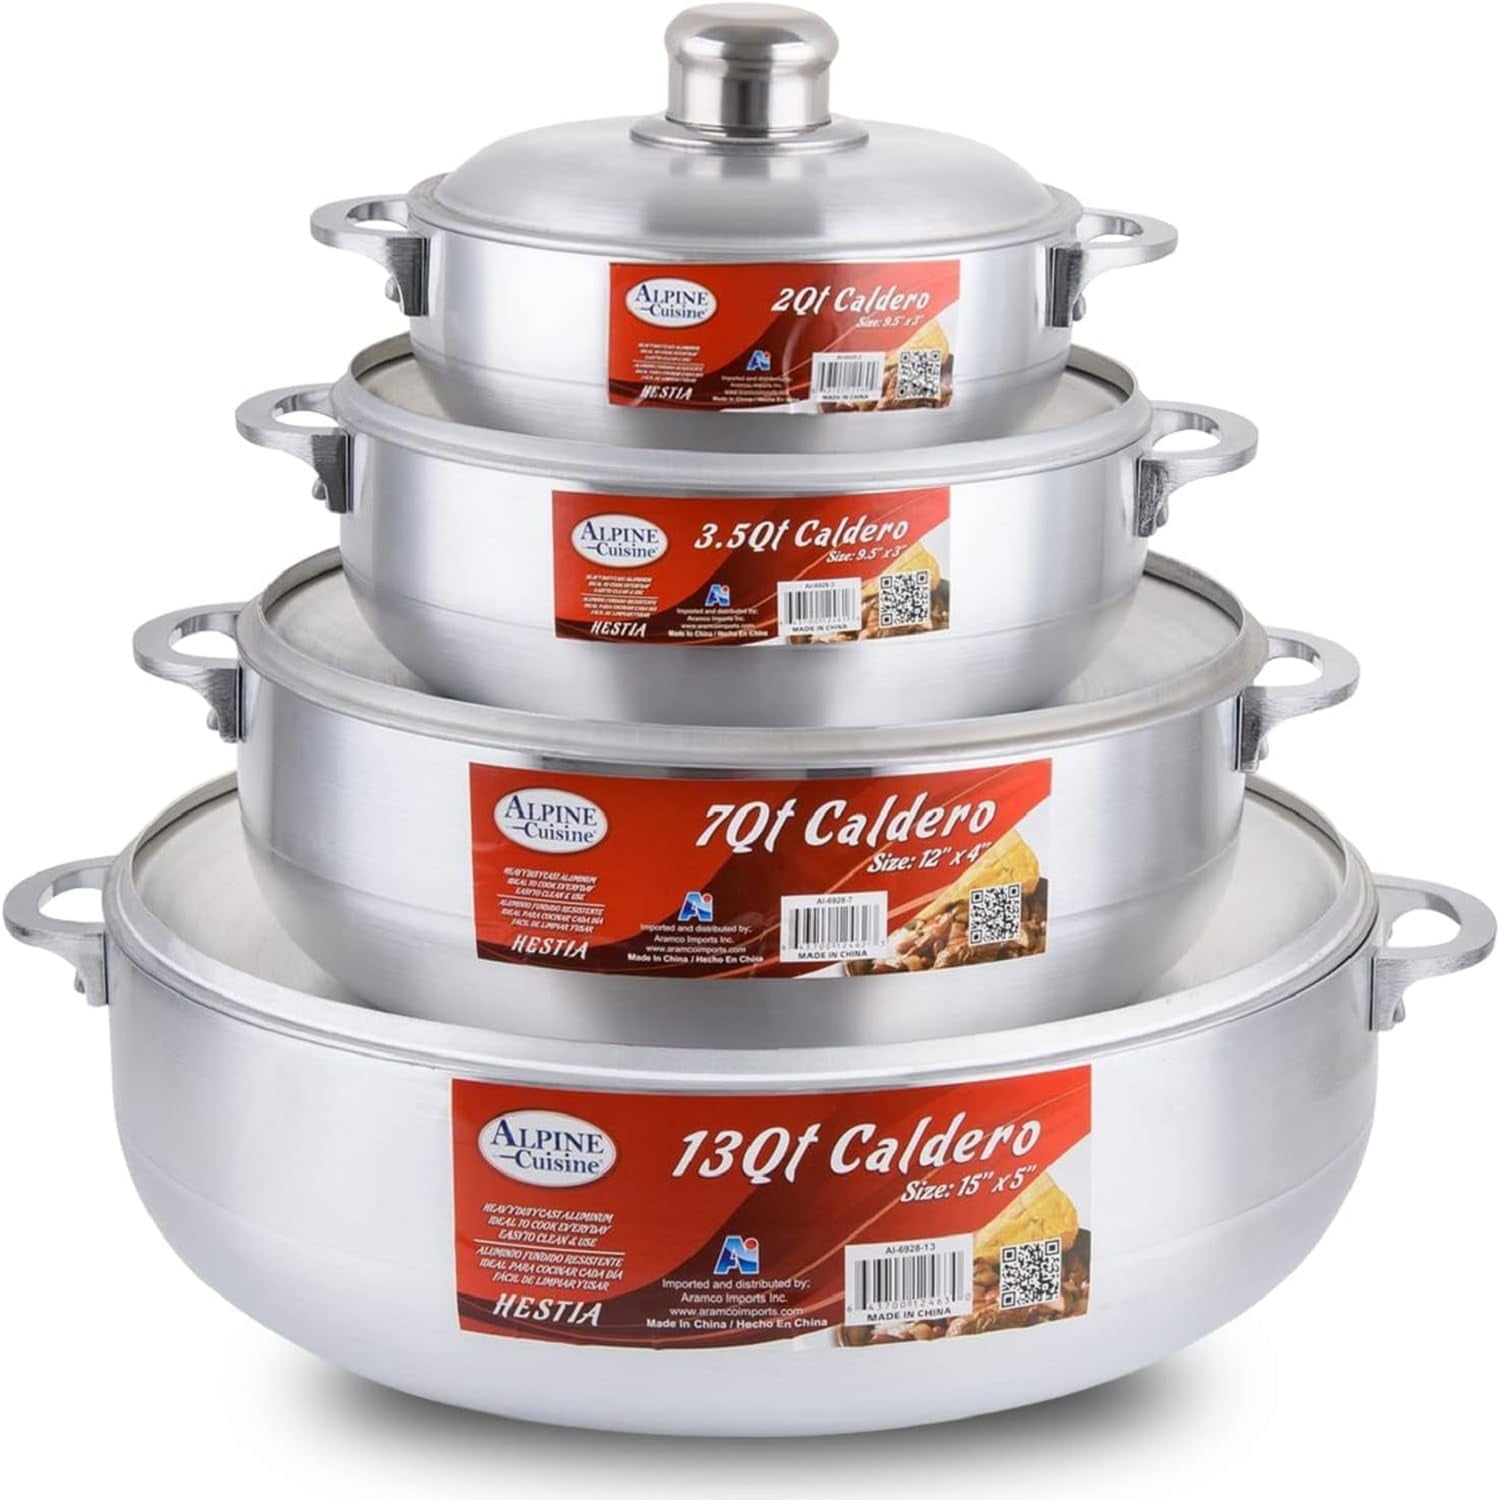 Alpine Cuisine Stainless Steel Pot with Lid 8 Quart - Stainless Steel Heavy  Duty, Commercial Grade Healthy Cookware kitchen Dutch oven, Dishwasher